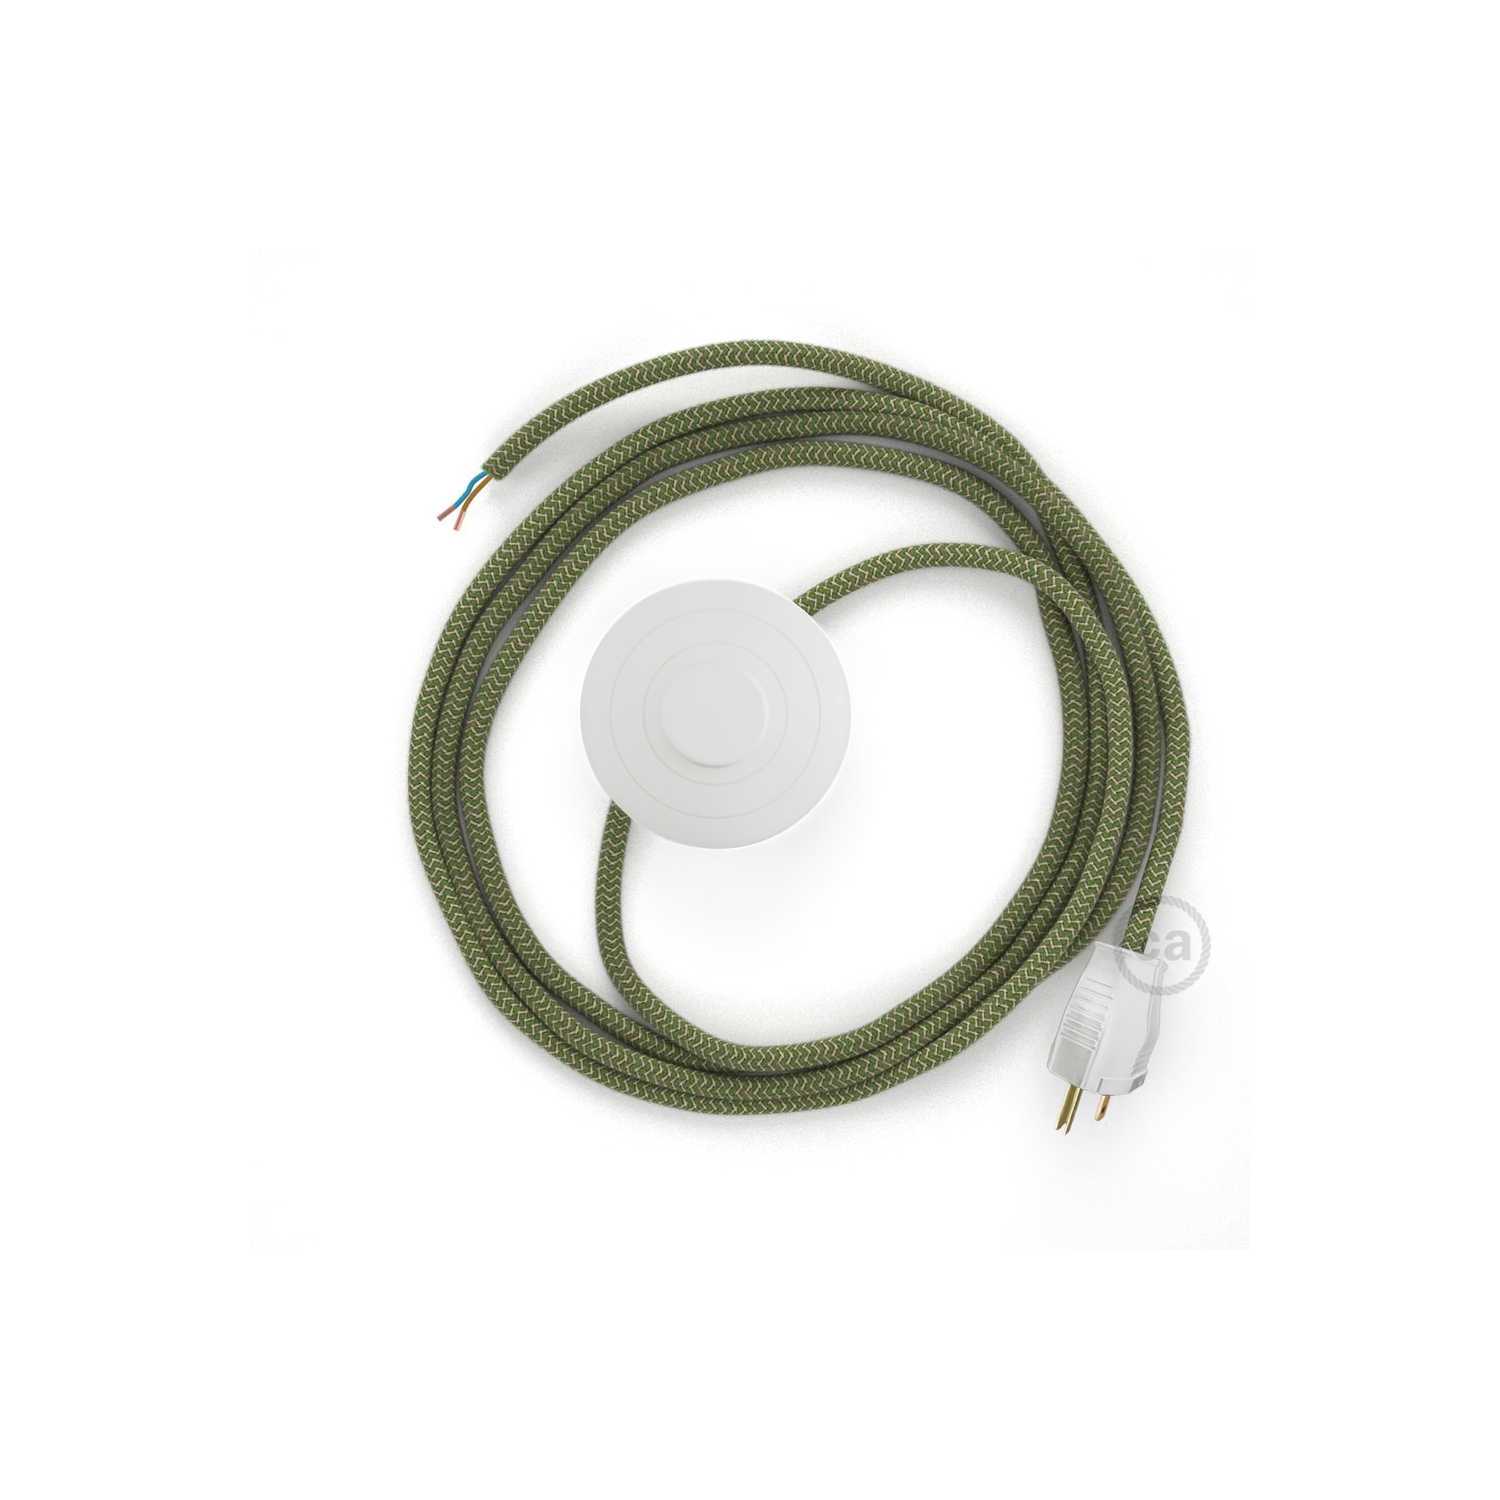 Power Cord with foot switch, RD72 Natural & Thyme Green Linen Chevron - Choose color of switch/plug